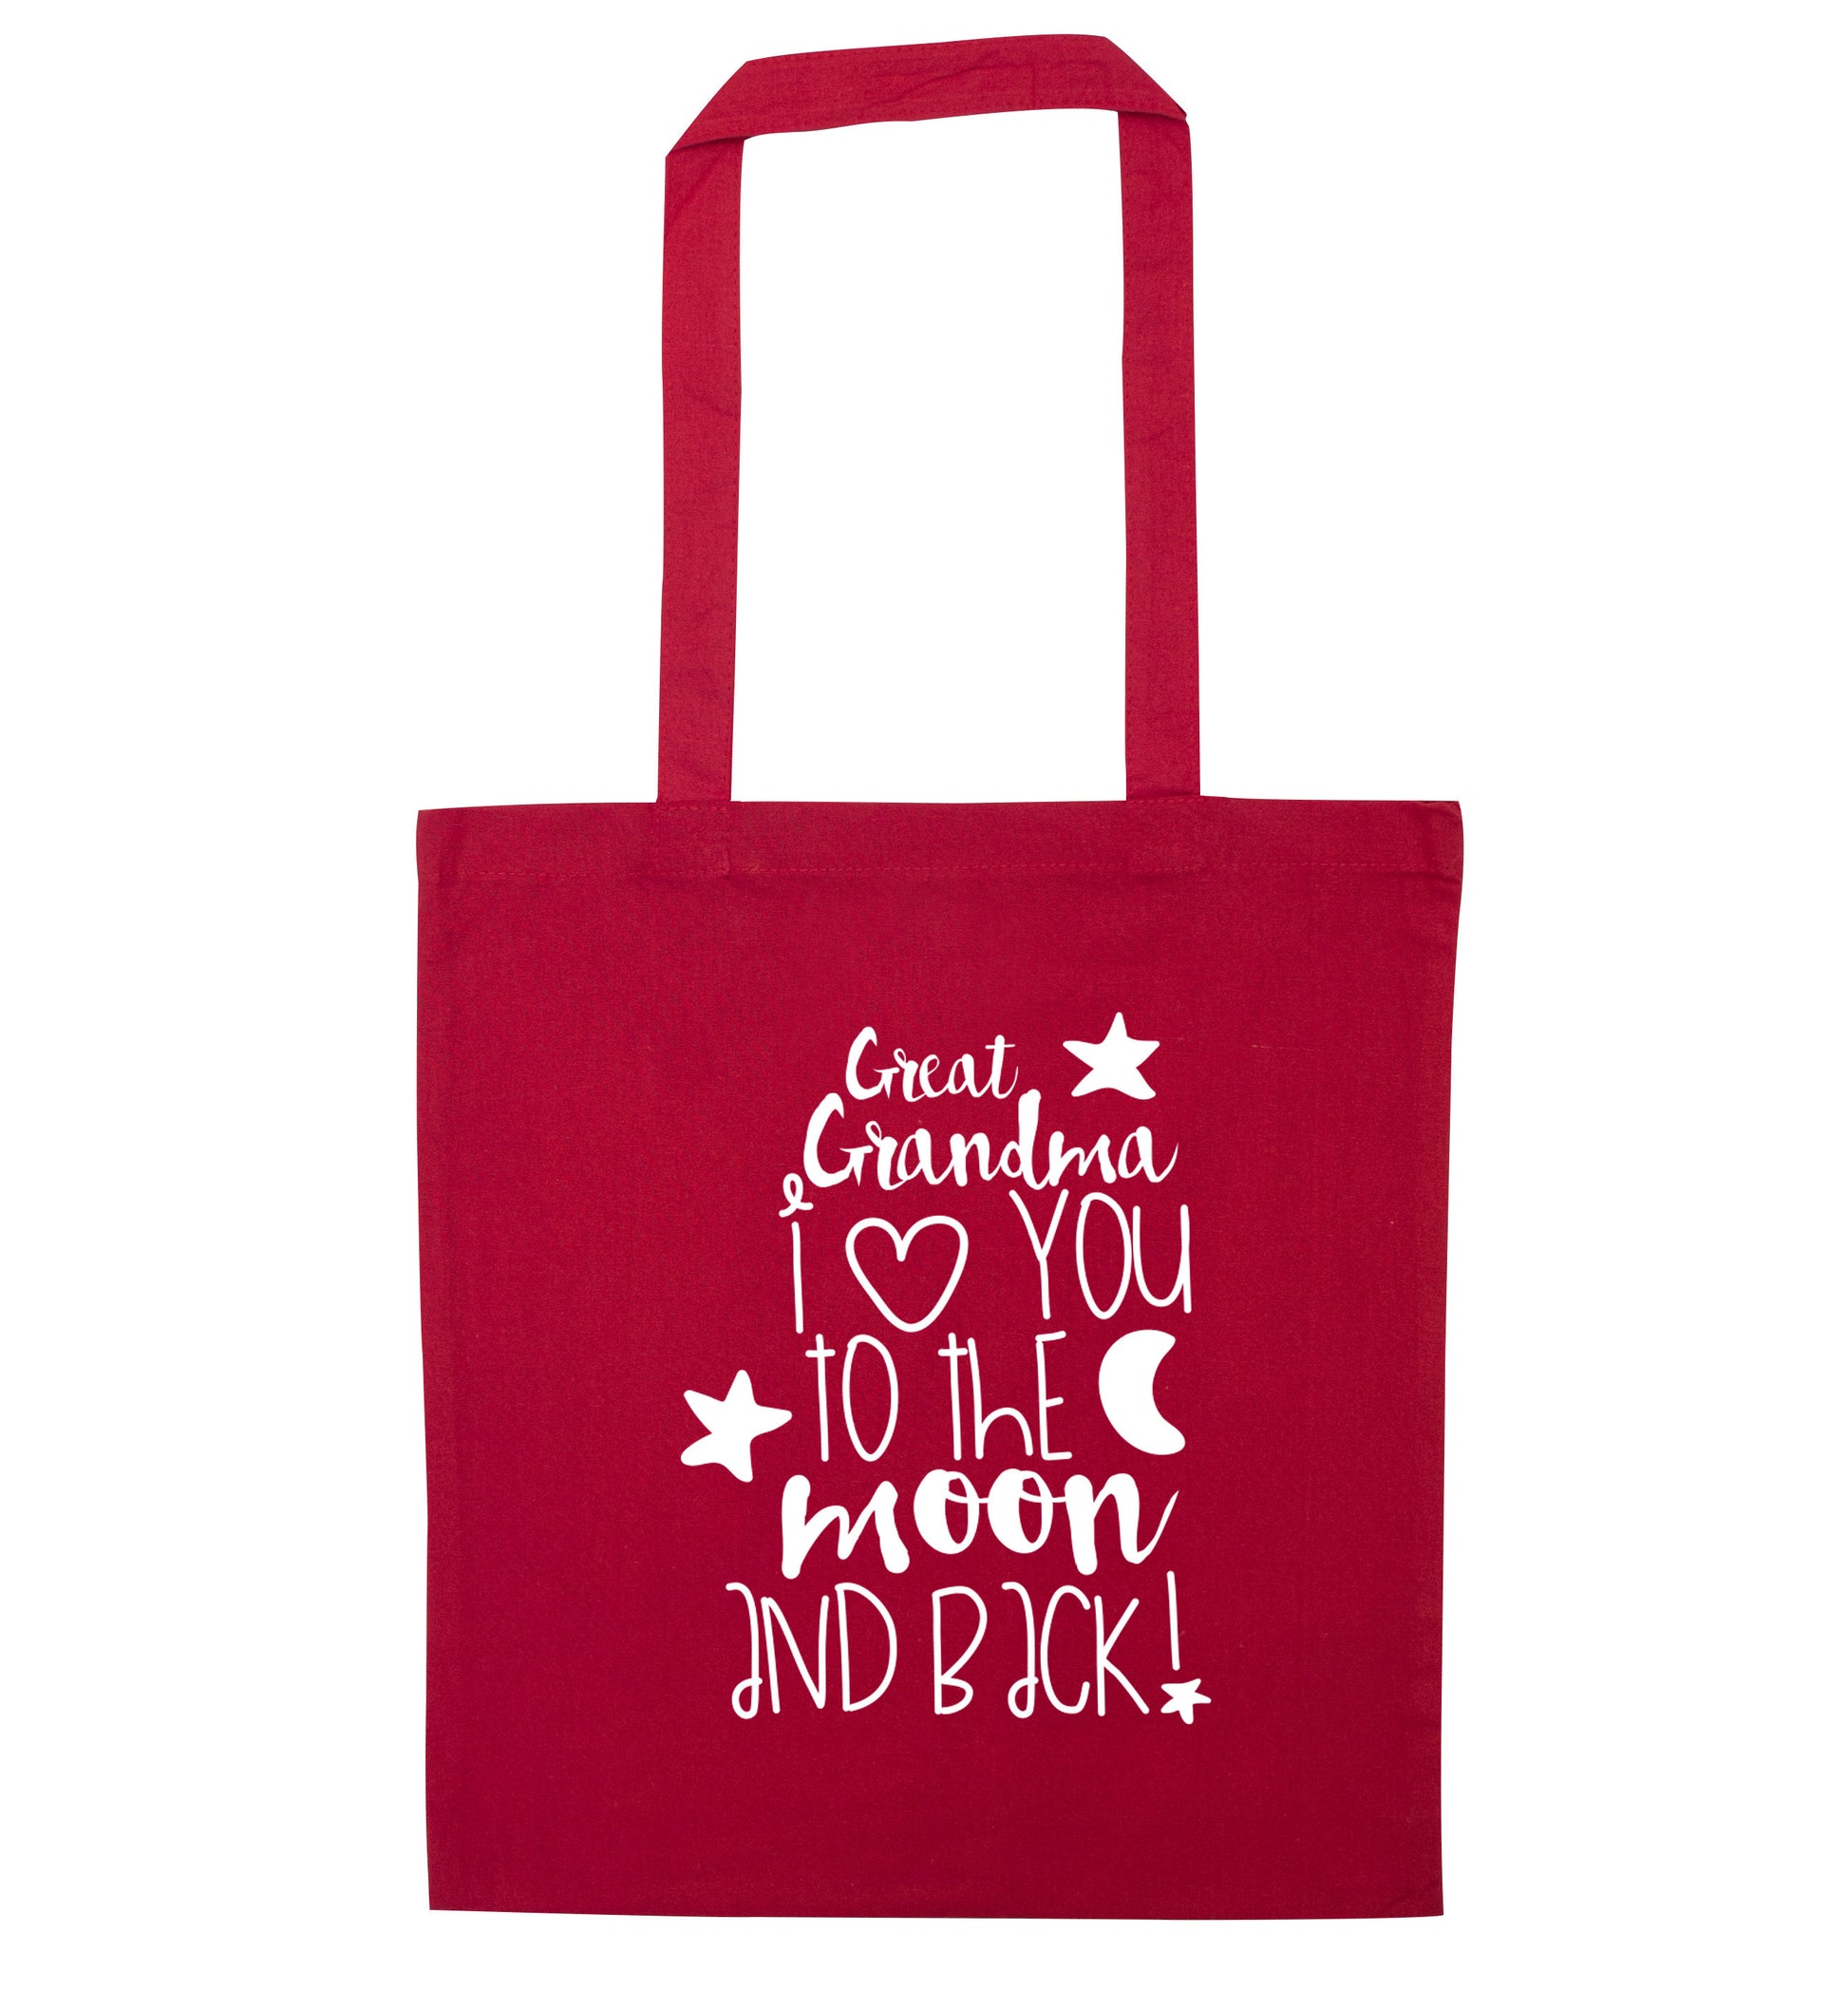 Great Grandma I love you to the moon and back red tote bag